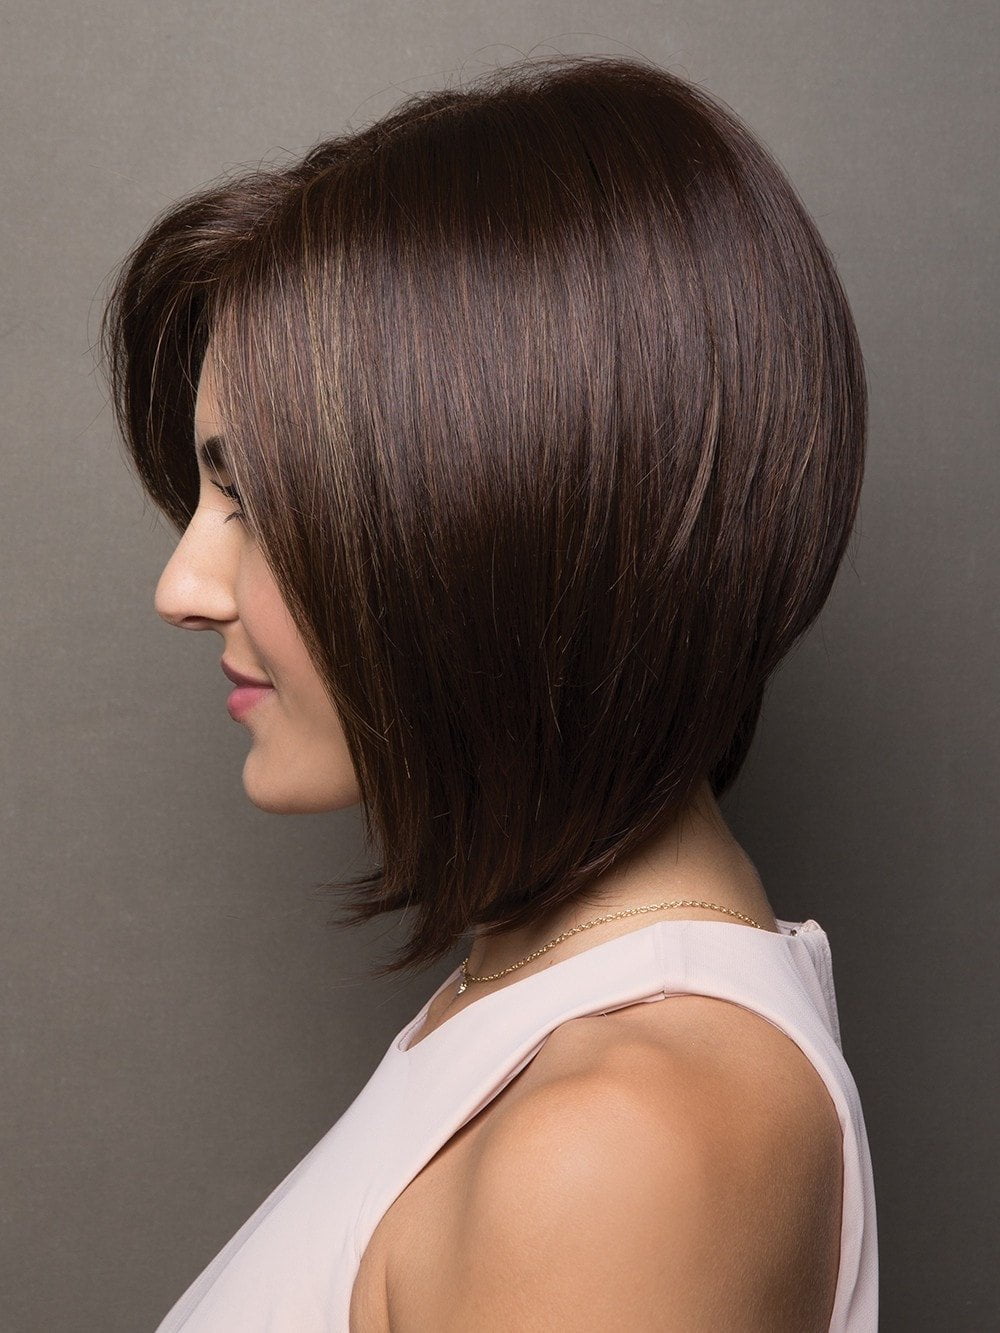 A beautiful bob style with softly razored long layers which gives this cut exceptional volume and movement